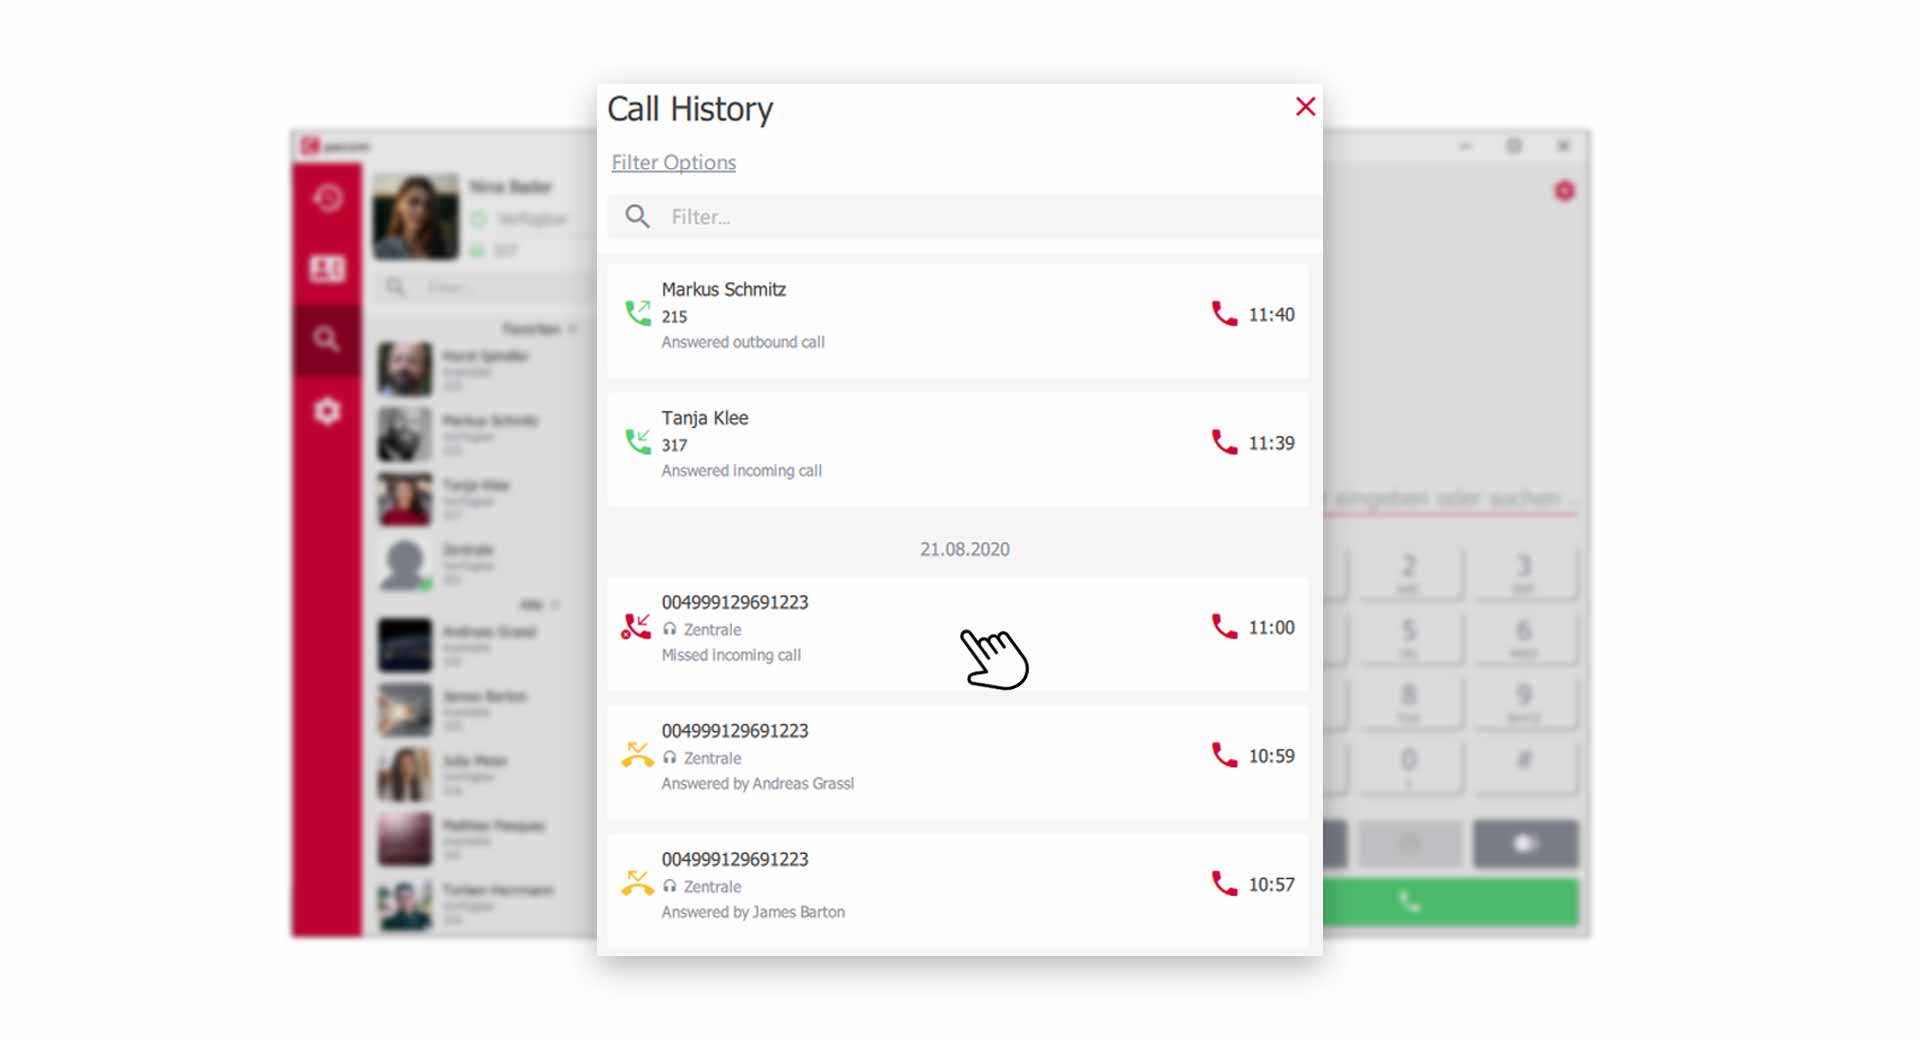 Call record detail view